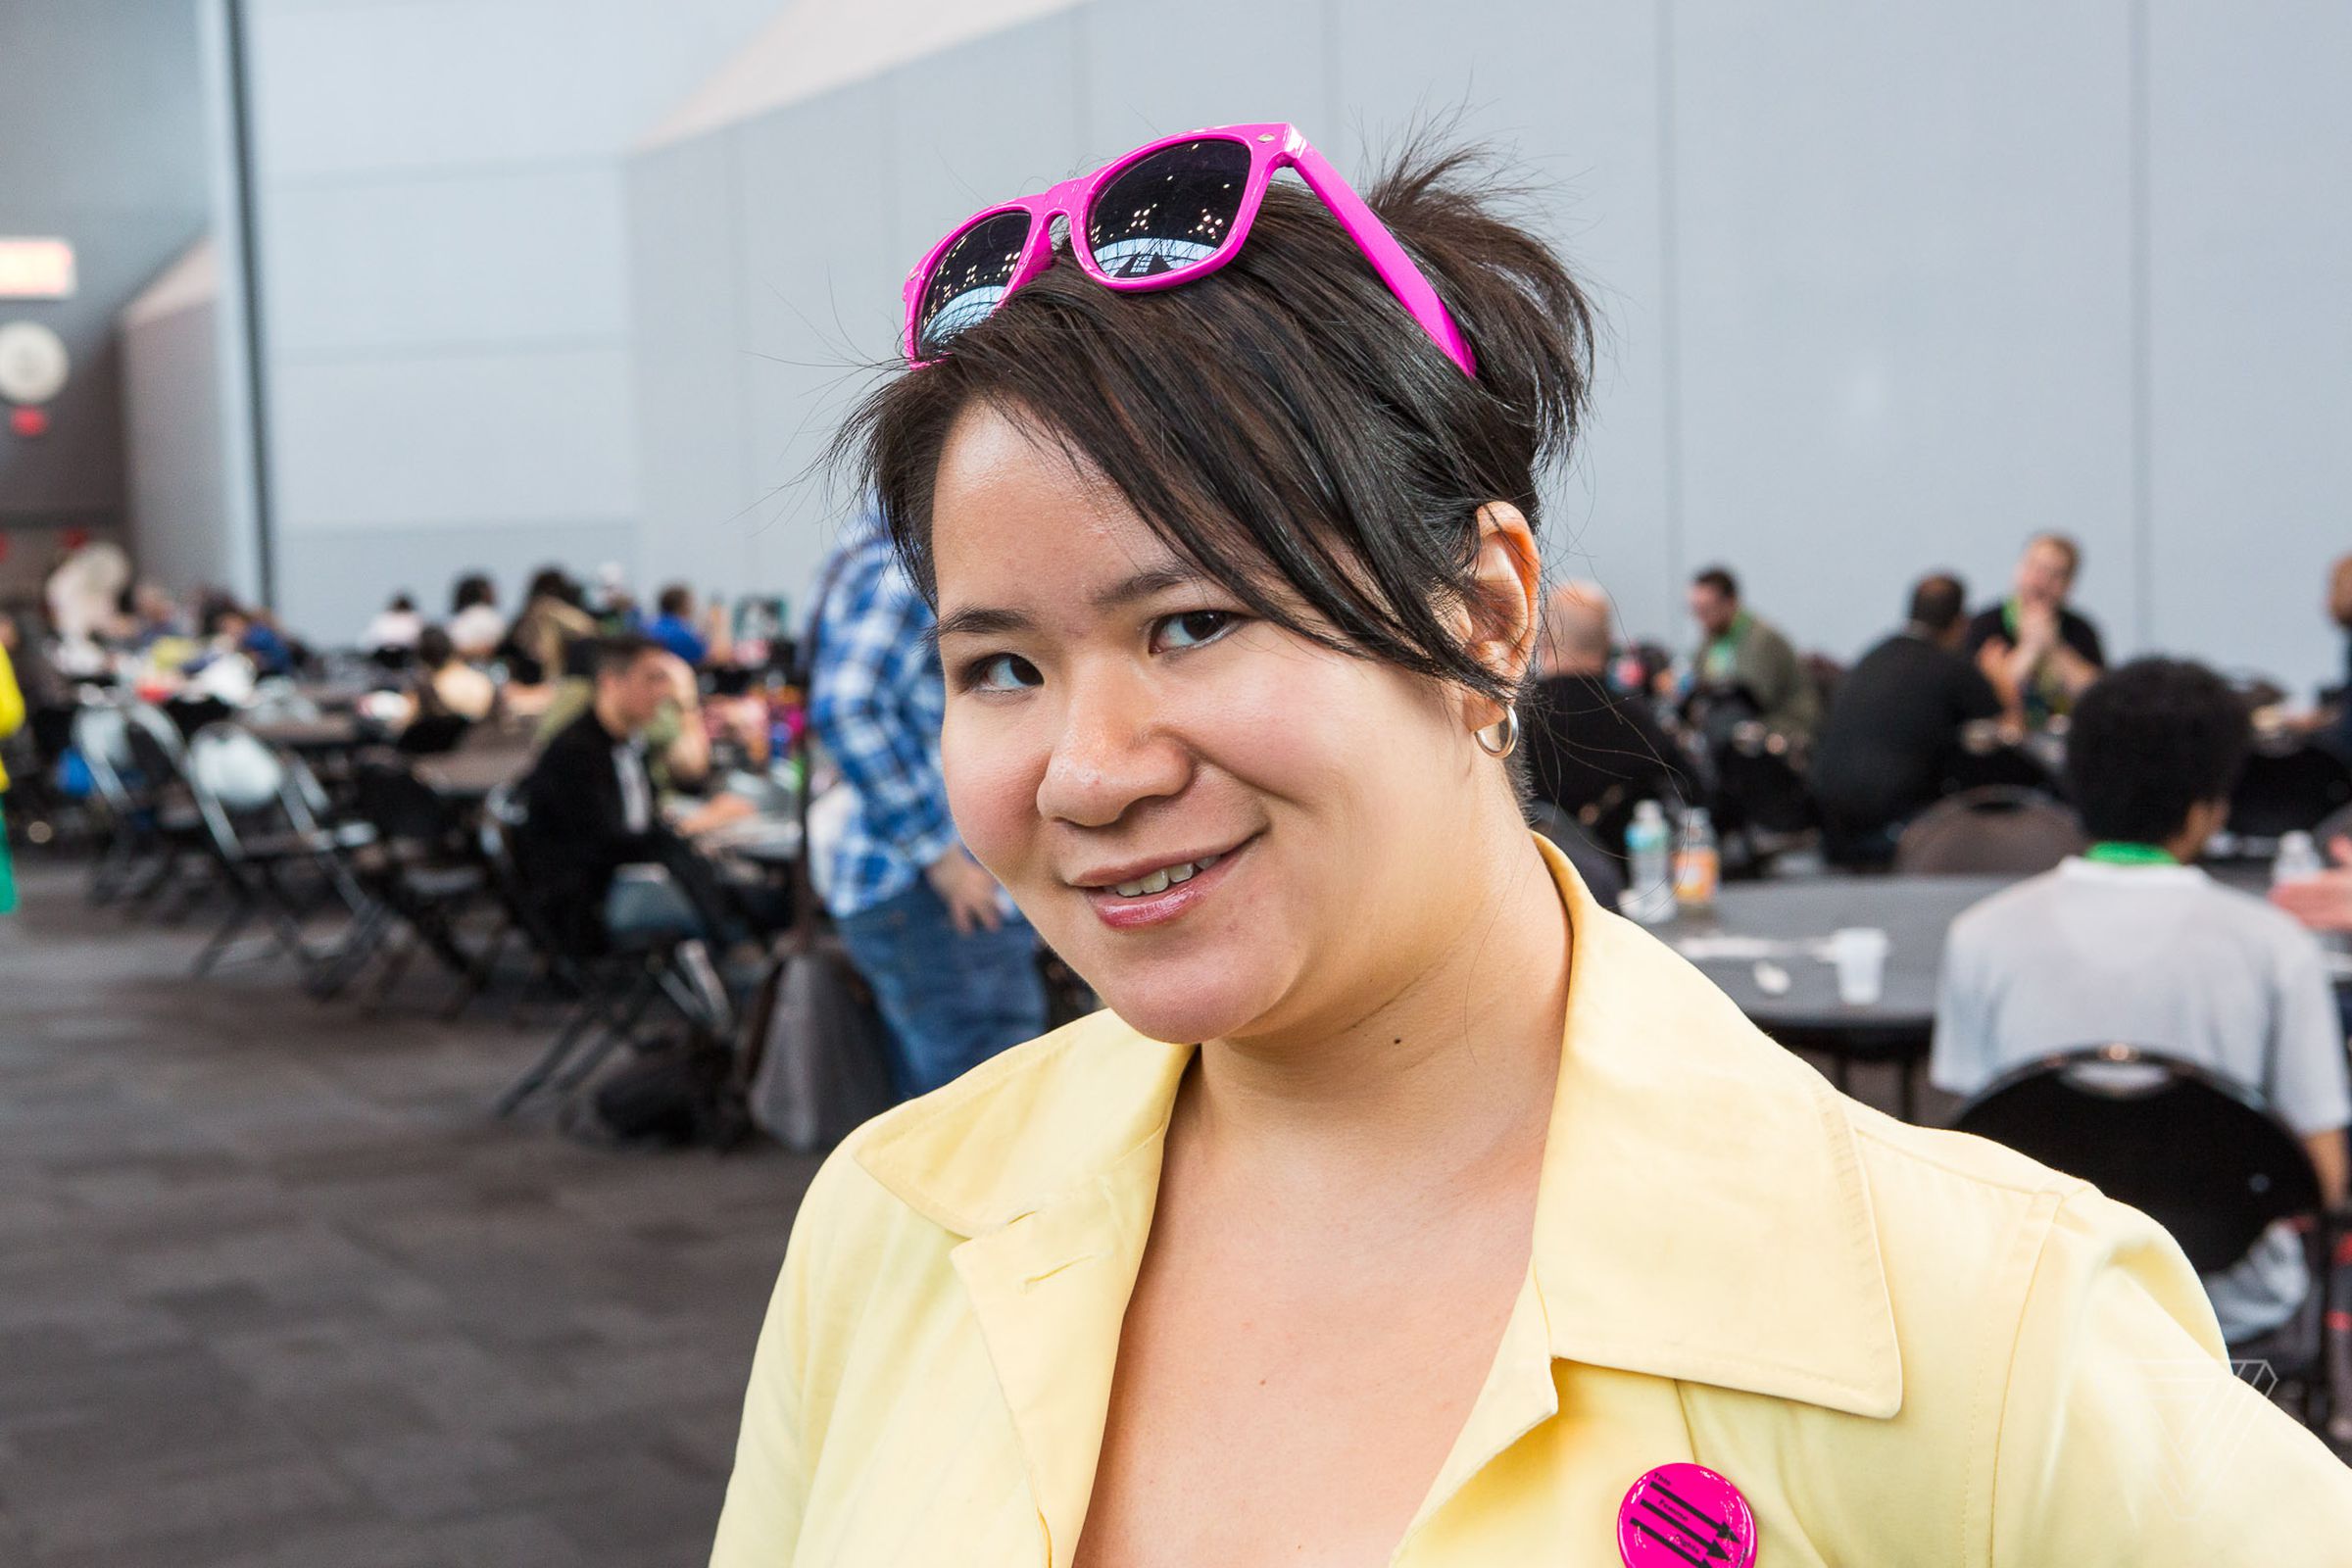 Tor books editor and steampunk activist Diana Pho at the New York Comic Con 2017.